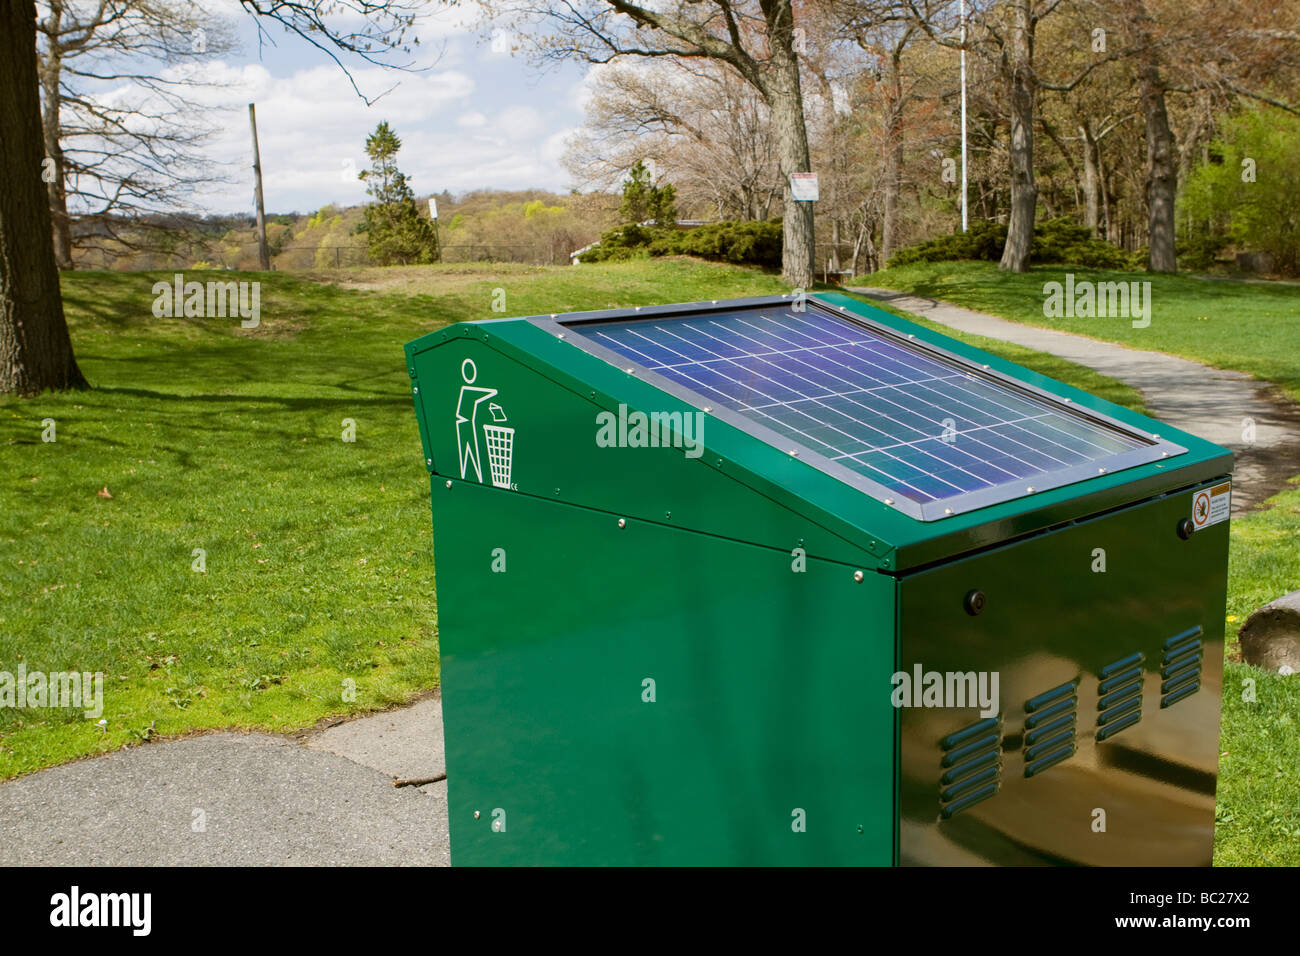 Big modern matte trash bin with an oval inlet, solar panal deployed on top,  black color, deployed at park on Craiyon